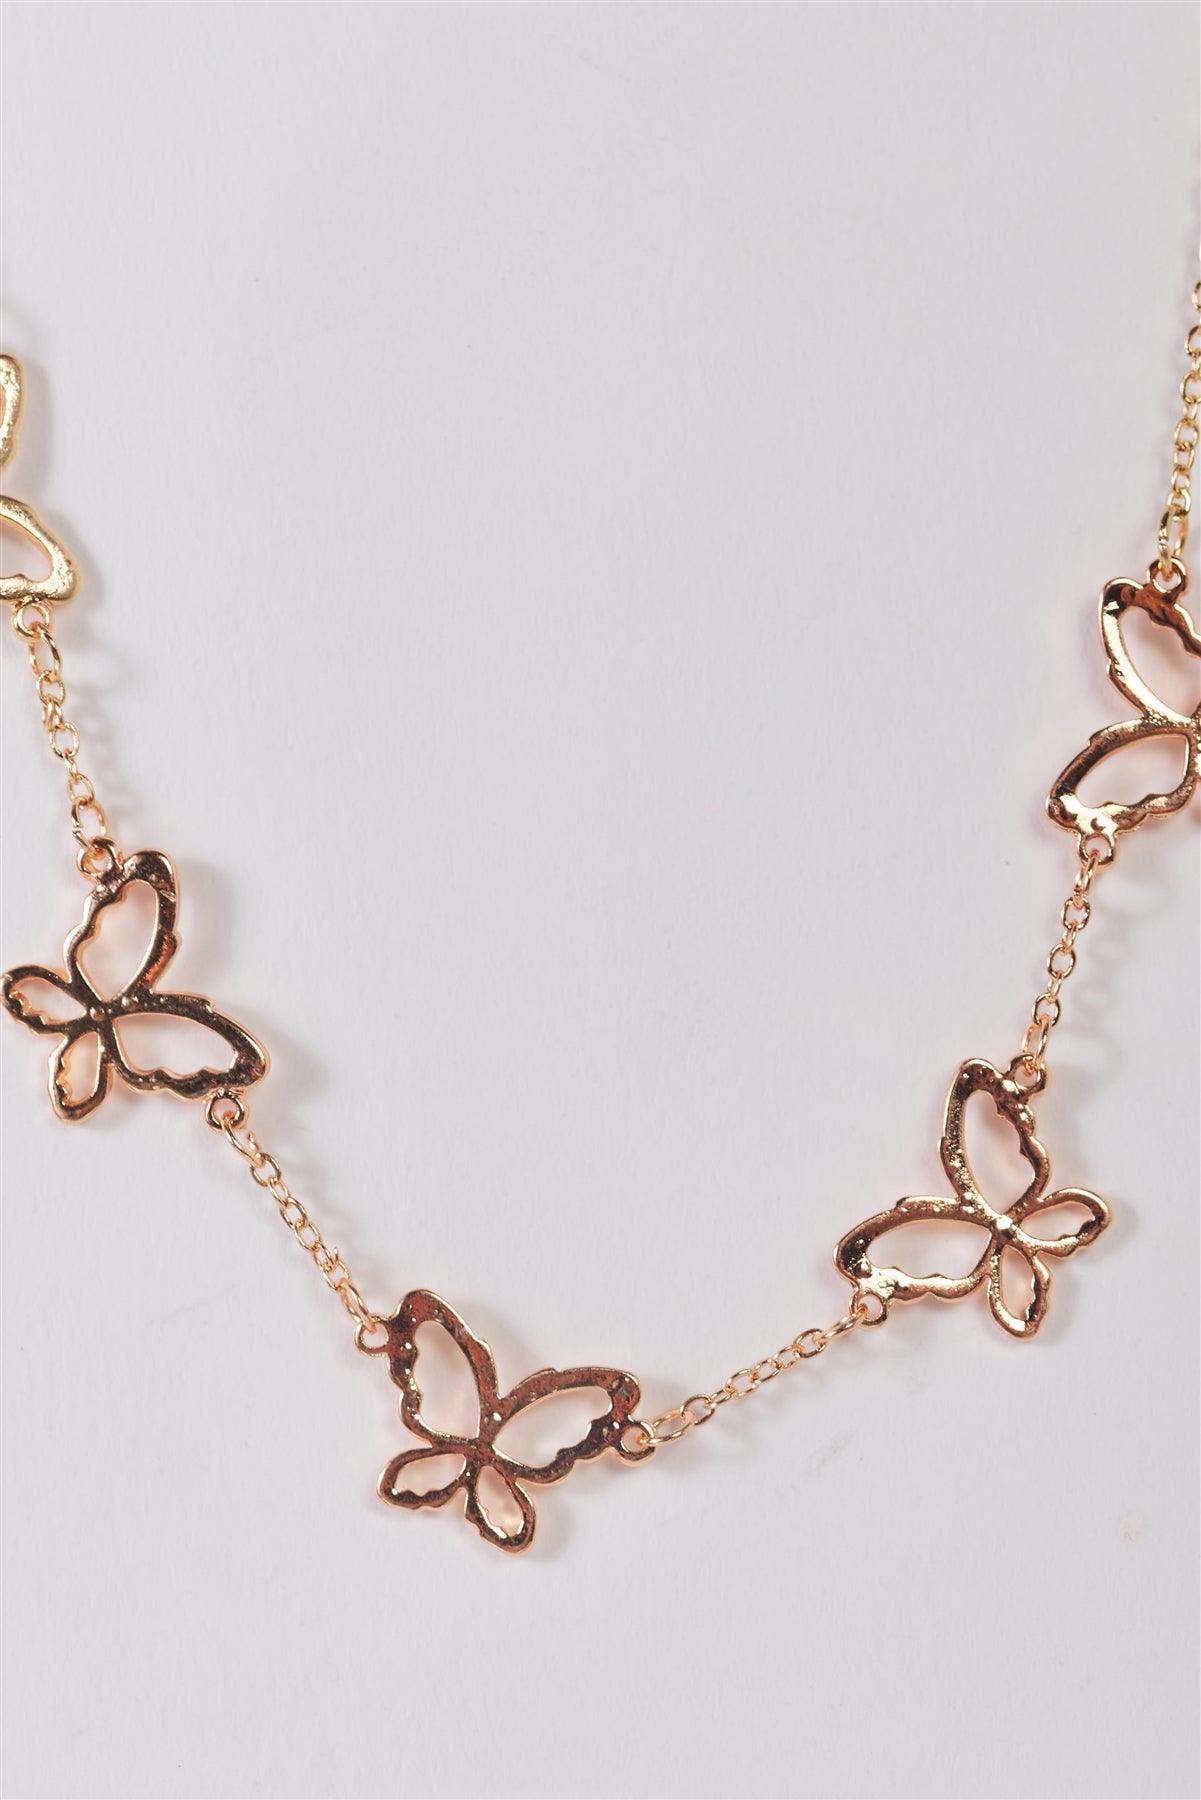 Gold Thin Chain With Laser Cut Butterfly Charms Necklace /3 Pieces